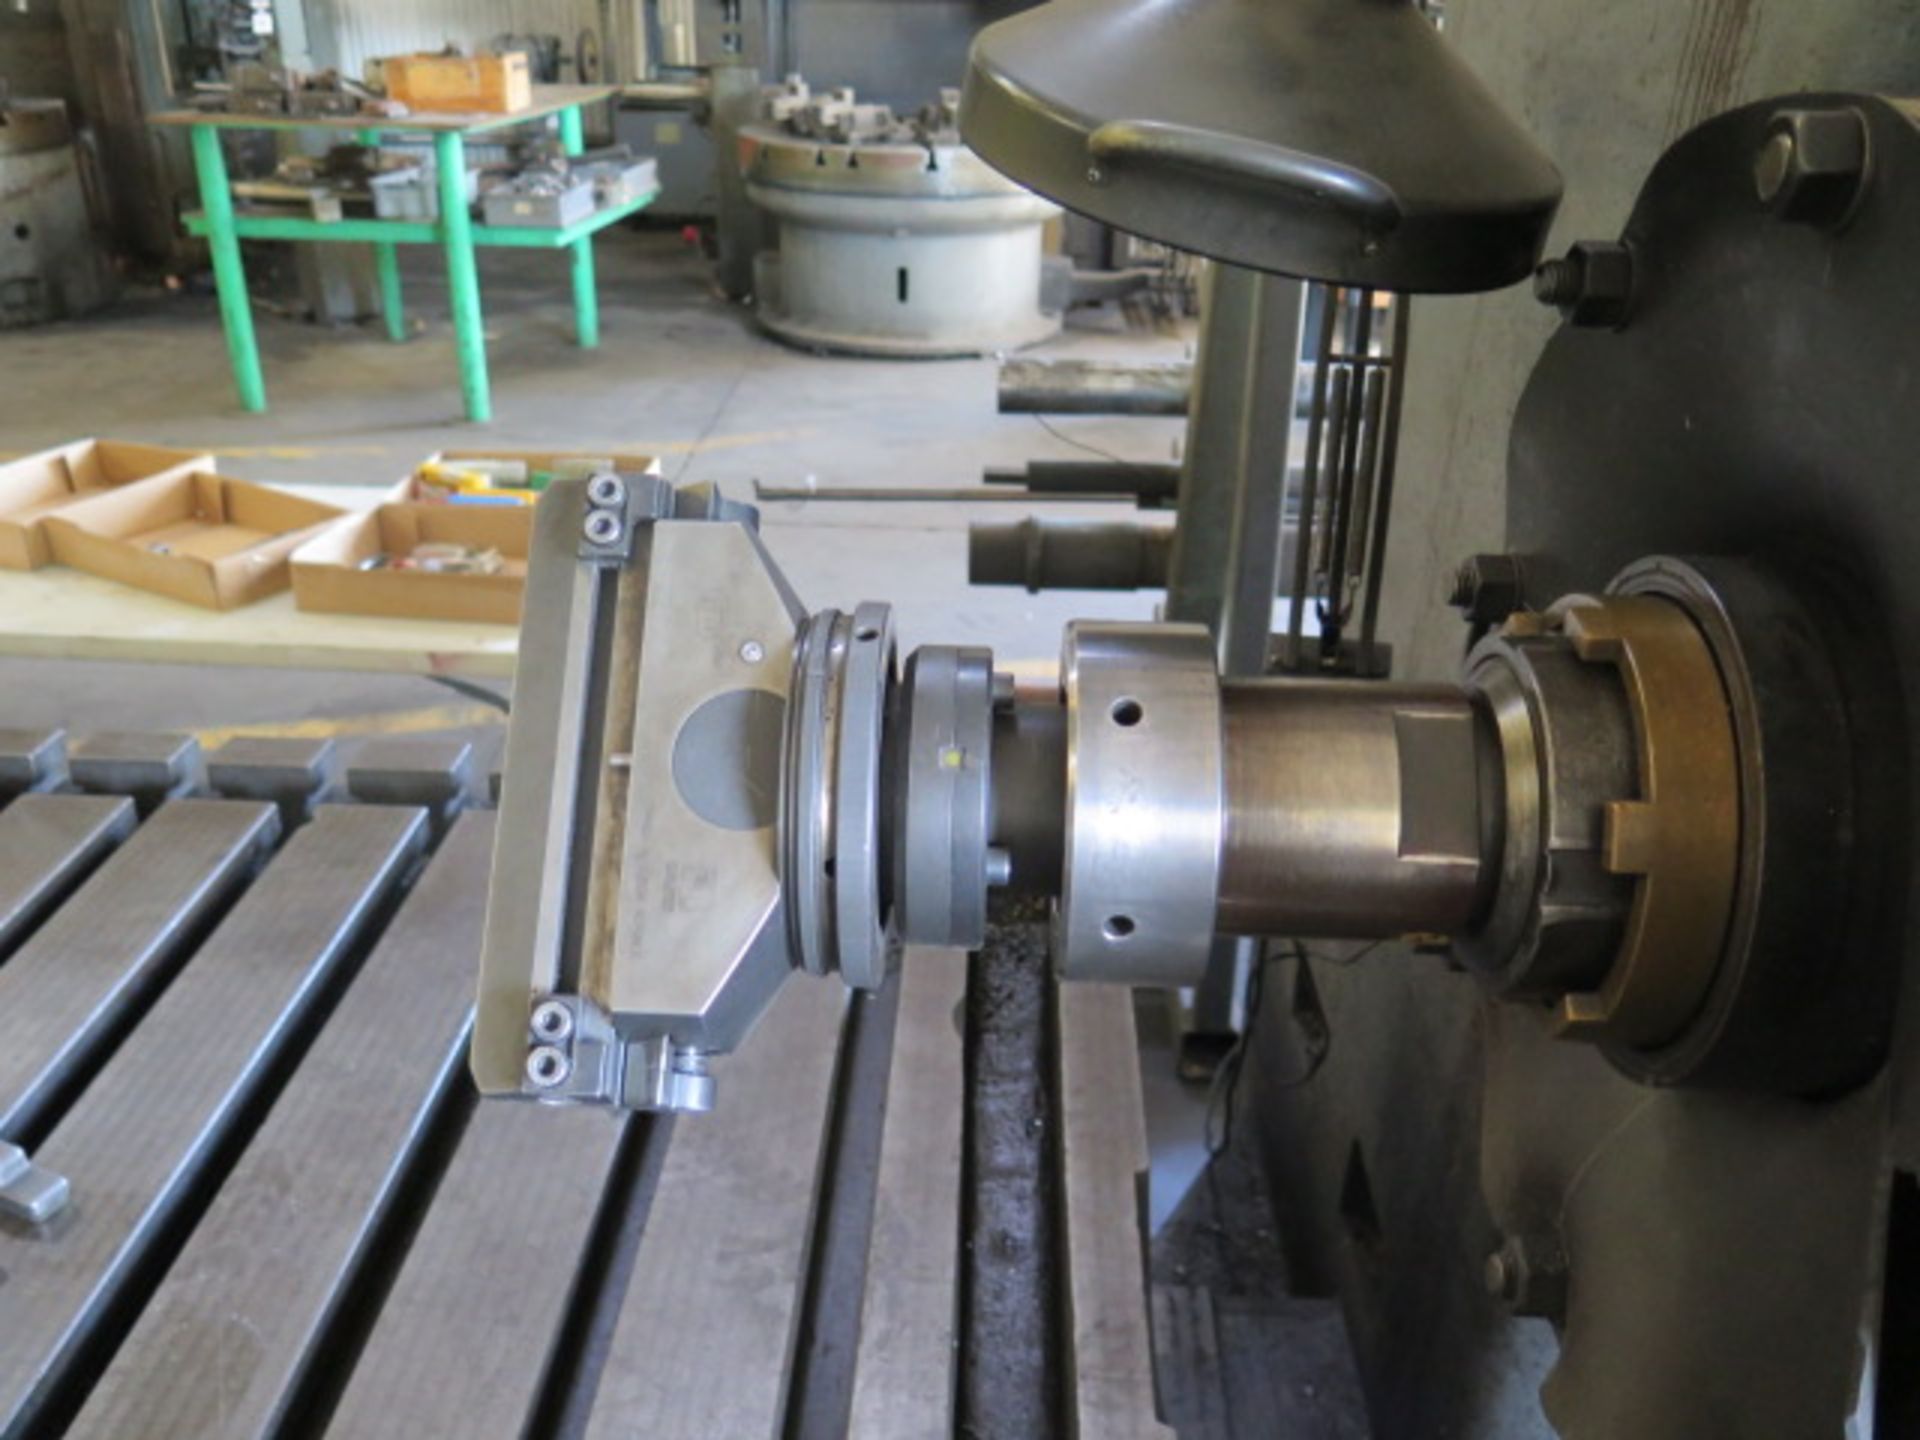 Scharmann HBM s/n 6652 w/ 3.4-650 RPM, 50-Taper Spindle, 6” Spindle. 55 ½” x 64”, SOLD AS IS - Image 6 of 15